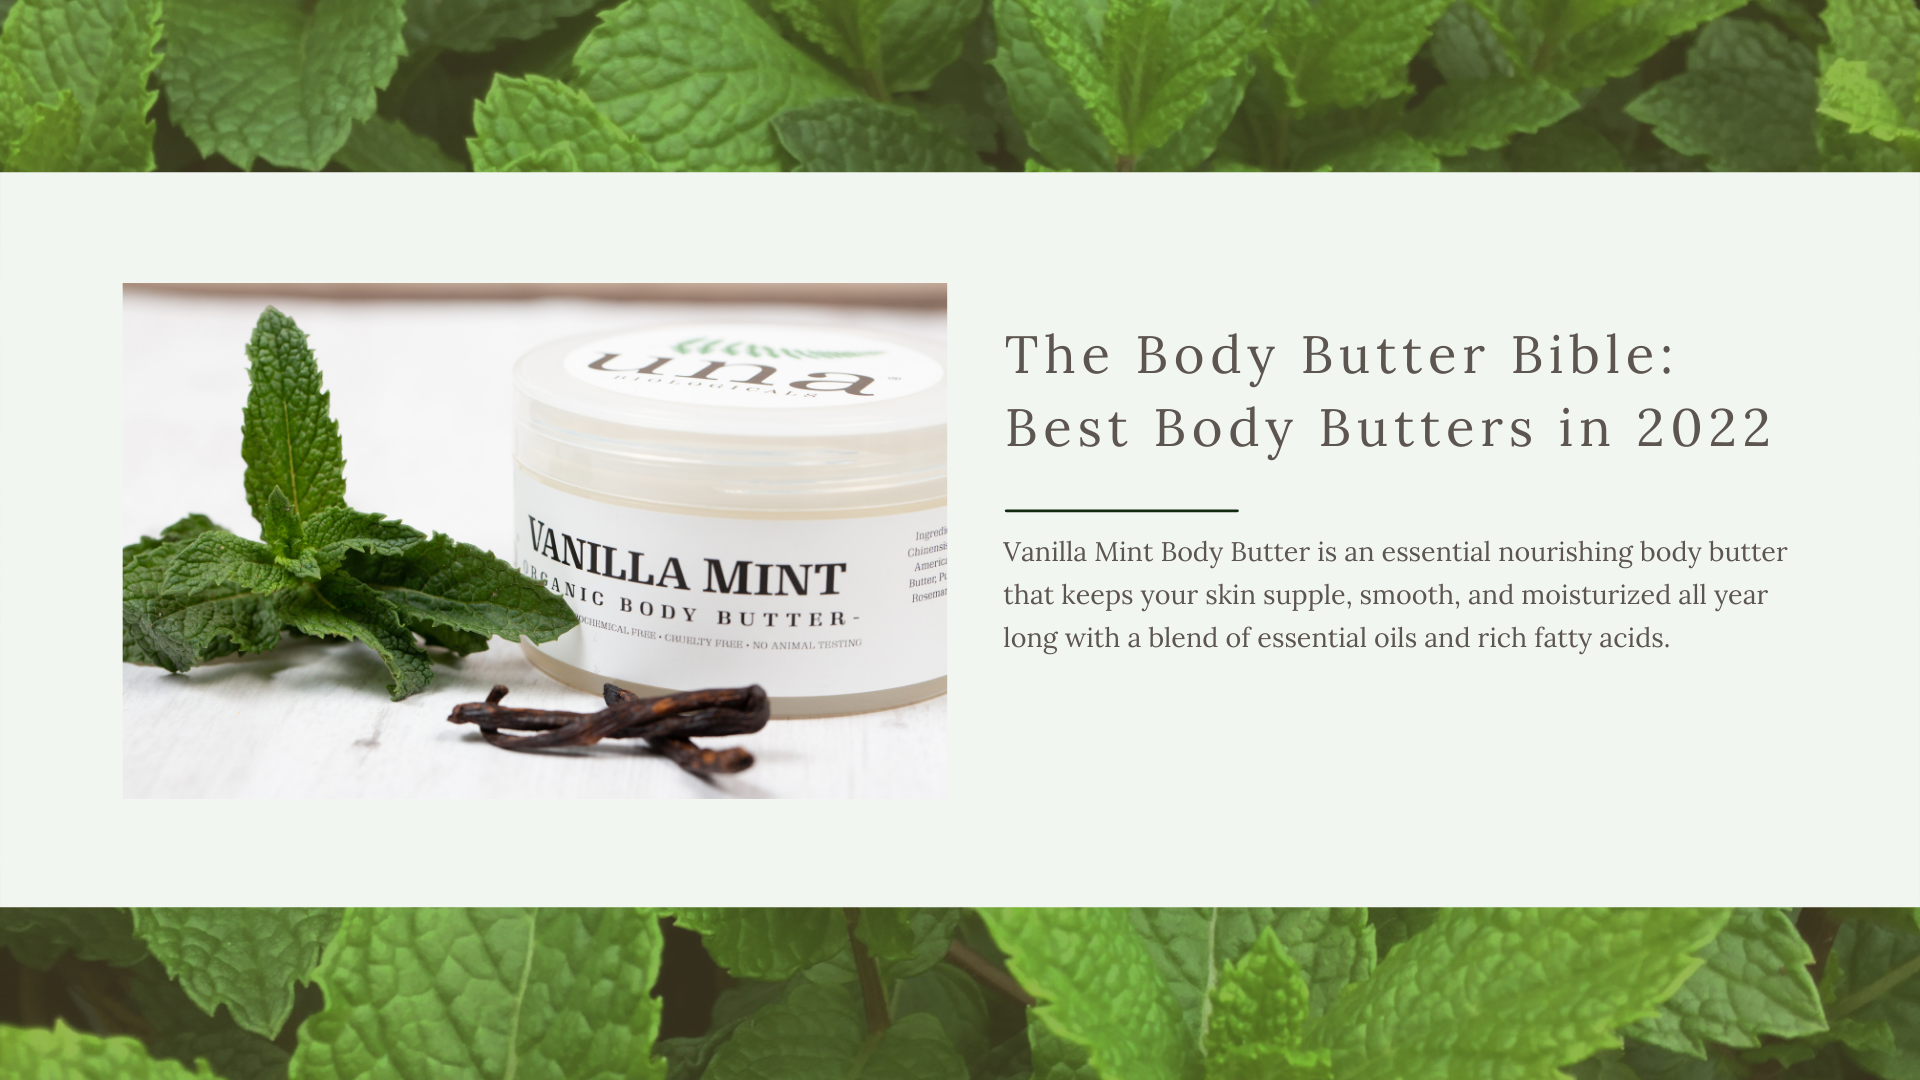 Vanilla Body Butter for relaxation